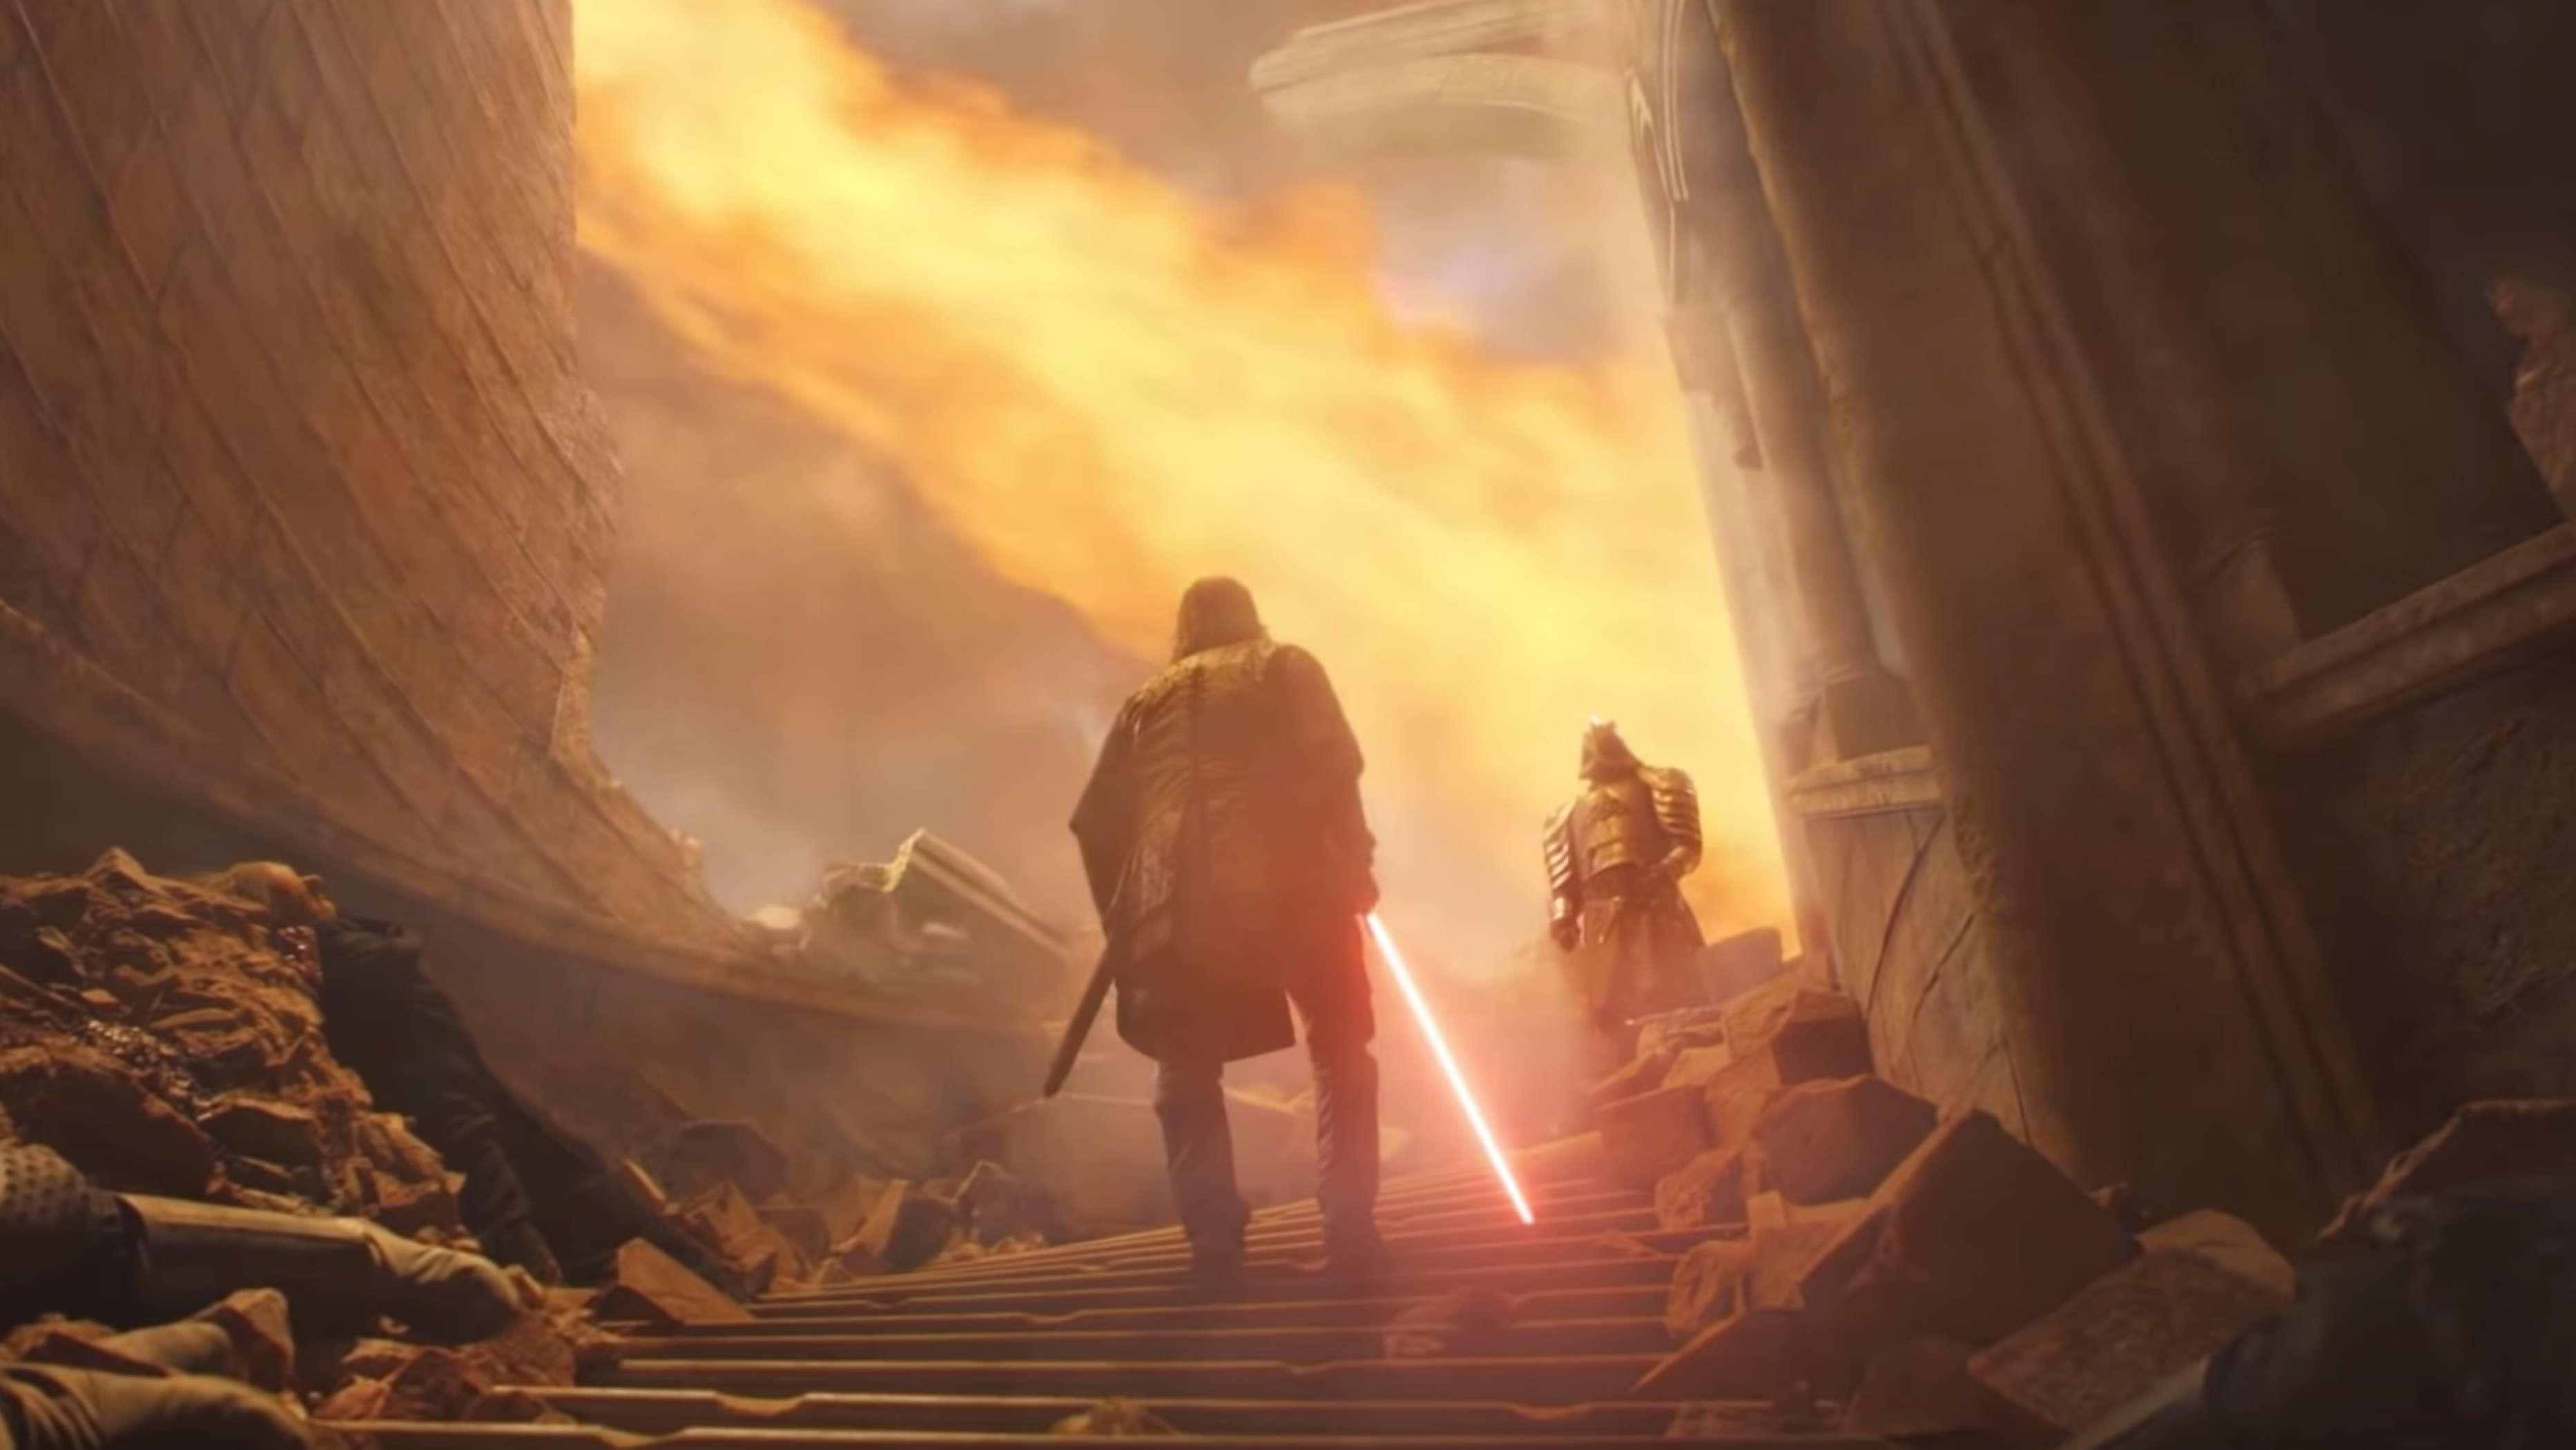 Game of Thrones' Cleganebowl Gets Upgraded with Lightsabers [WATCH]